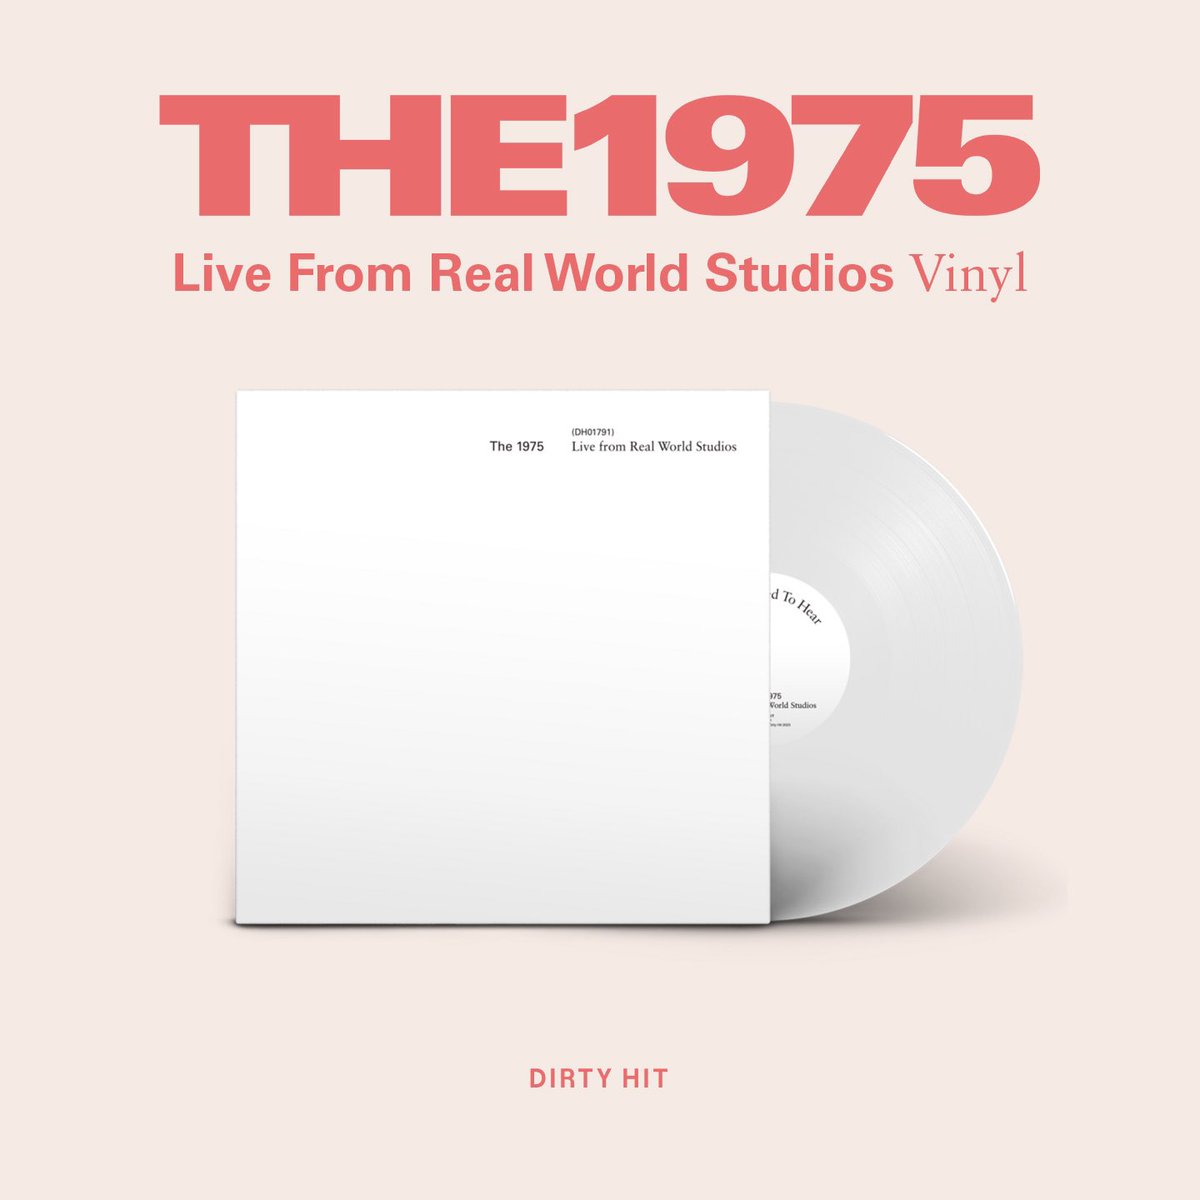 The 1975 10th Anniversary Japan Box Set and The 1975 Live from Real World Studios. Restocked on vinyl, available now via the Dirty Hit Store. the-1975.ffm.to/store